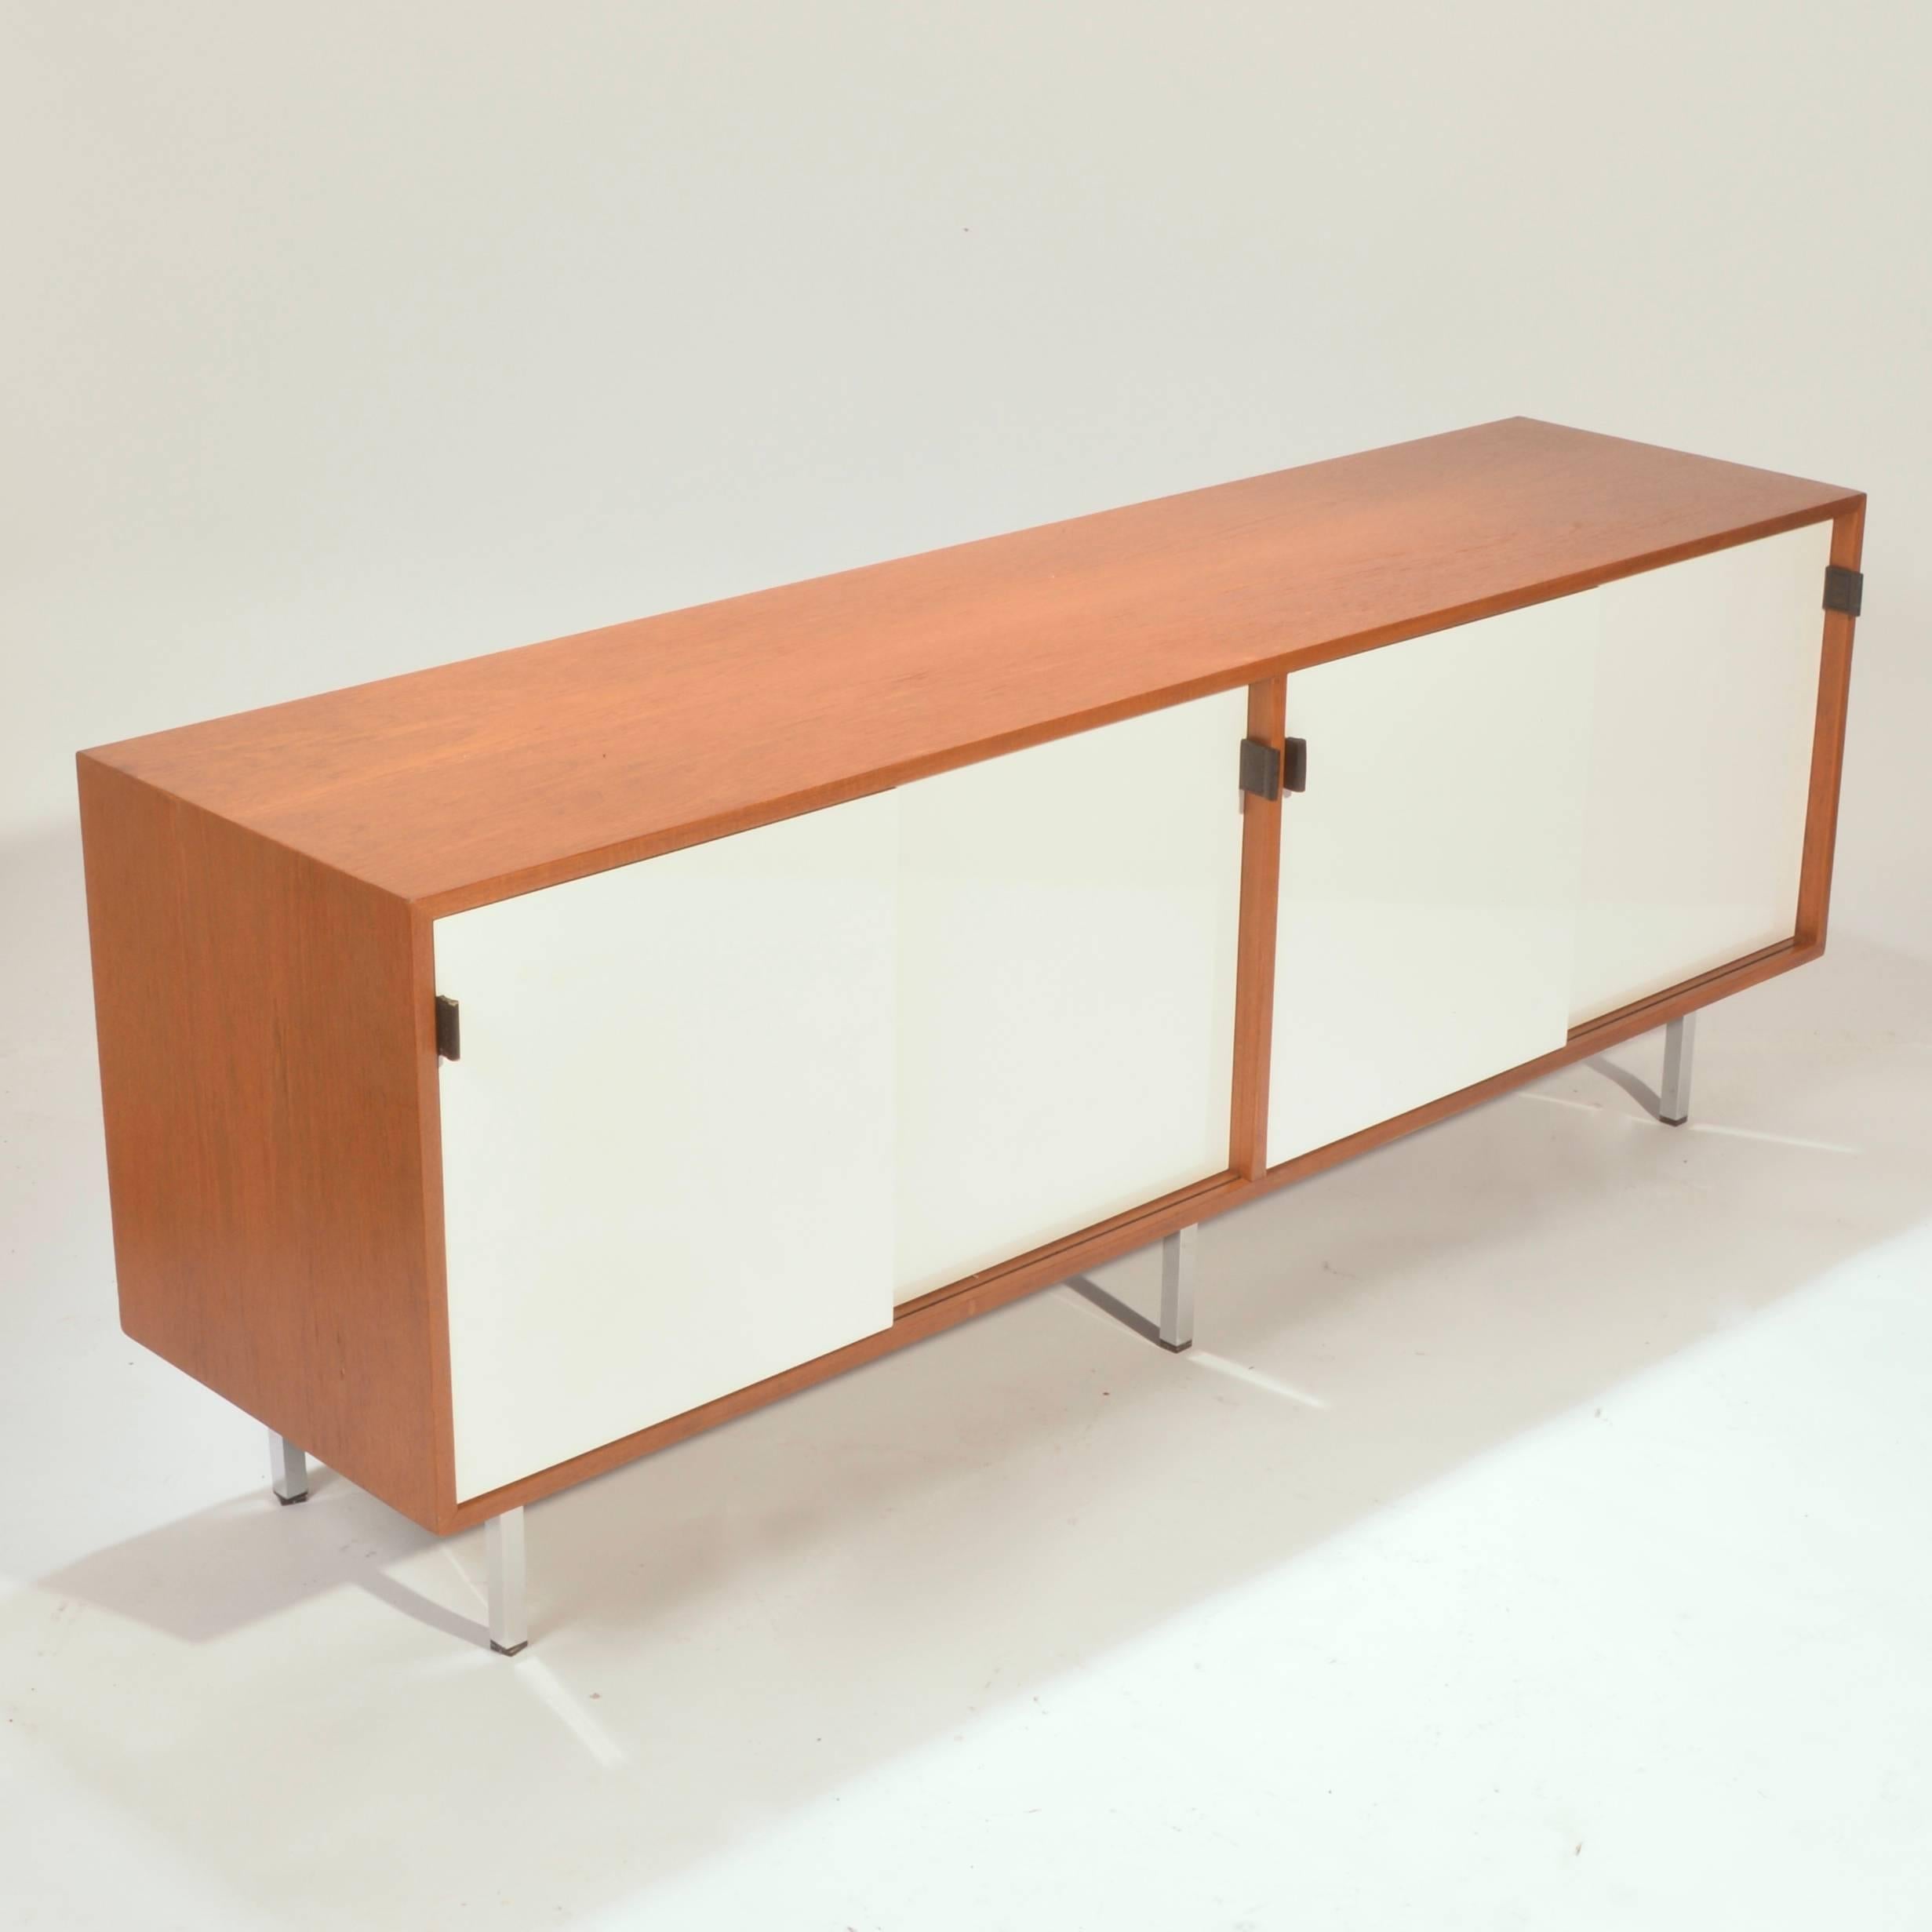 American Early and Rare Florence Knoll Credenza in Teak and White Formica